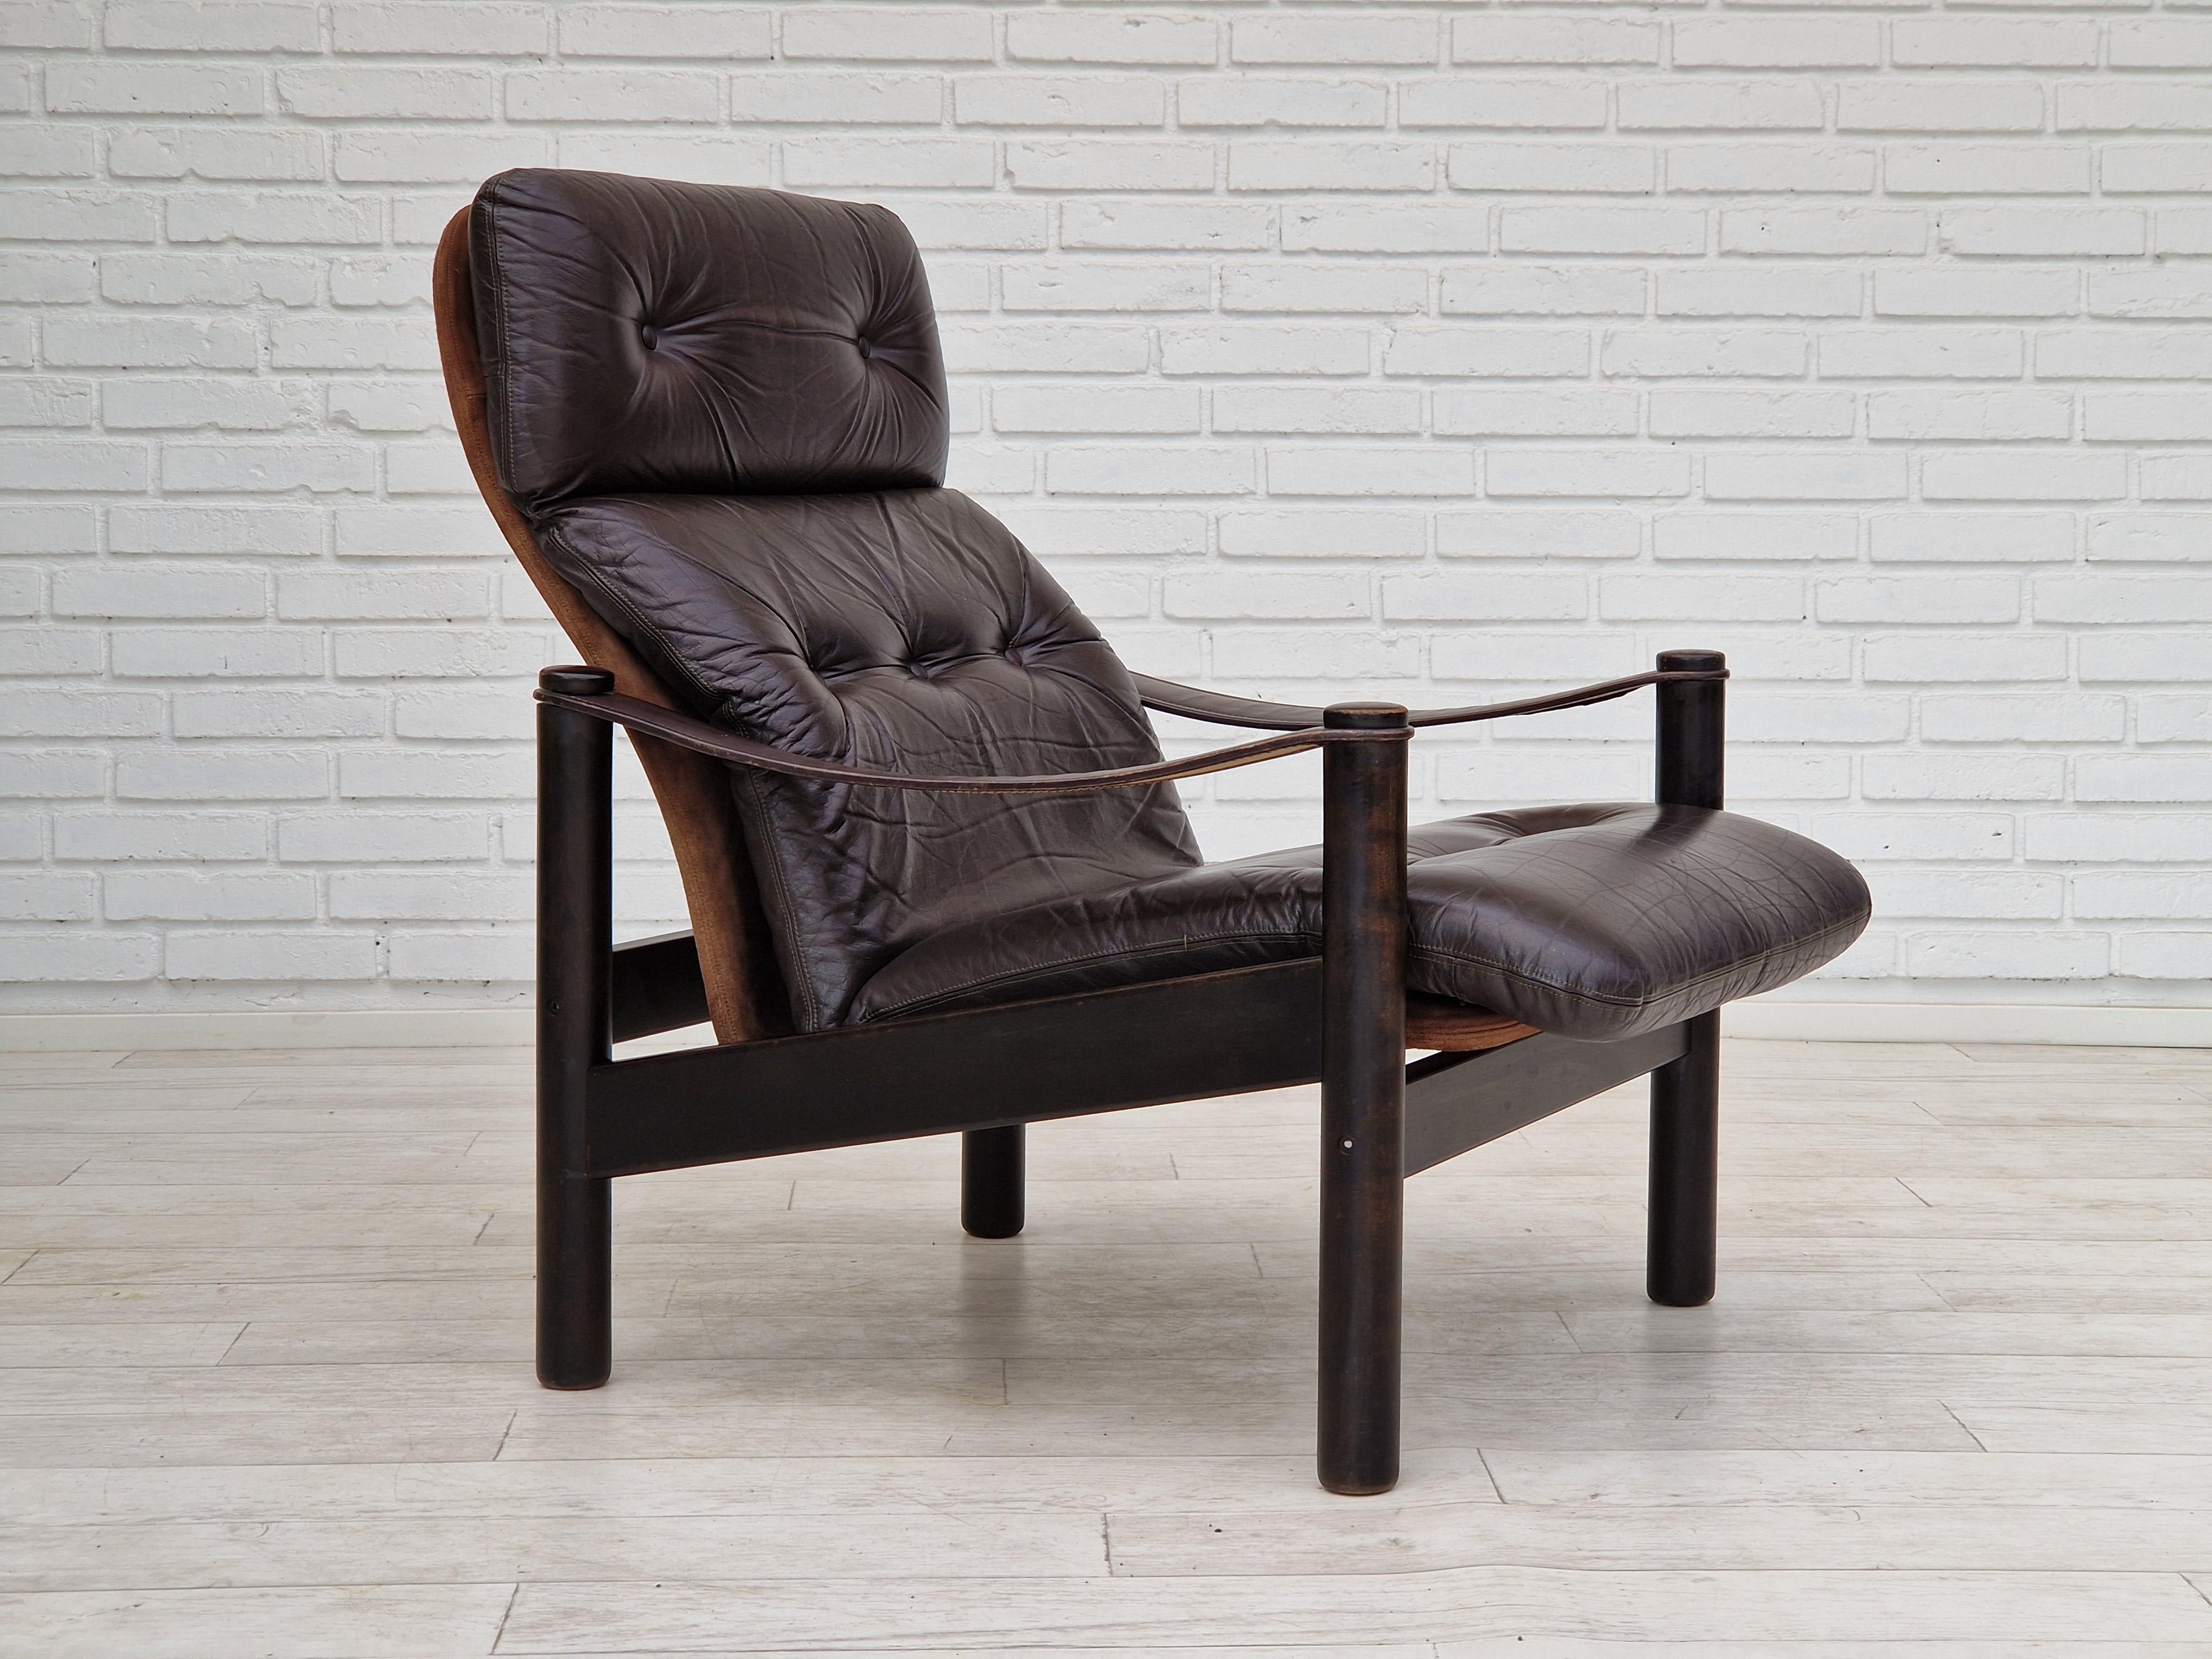 1970s, Danish design by Ebbe Gehl & Søren Nissen. Lounge armchair with stained beech wood frame, upholstered in brown leather, back in nubuck leather. Manufactured at Jeki Møbler Bramming. Original good condition: no smells and no stains.